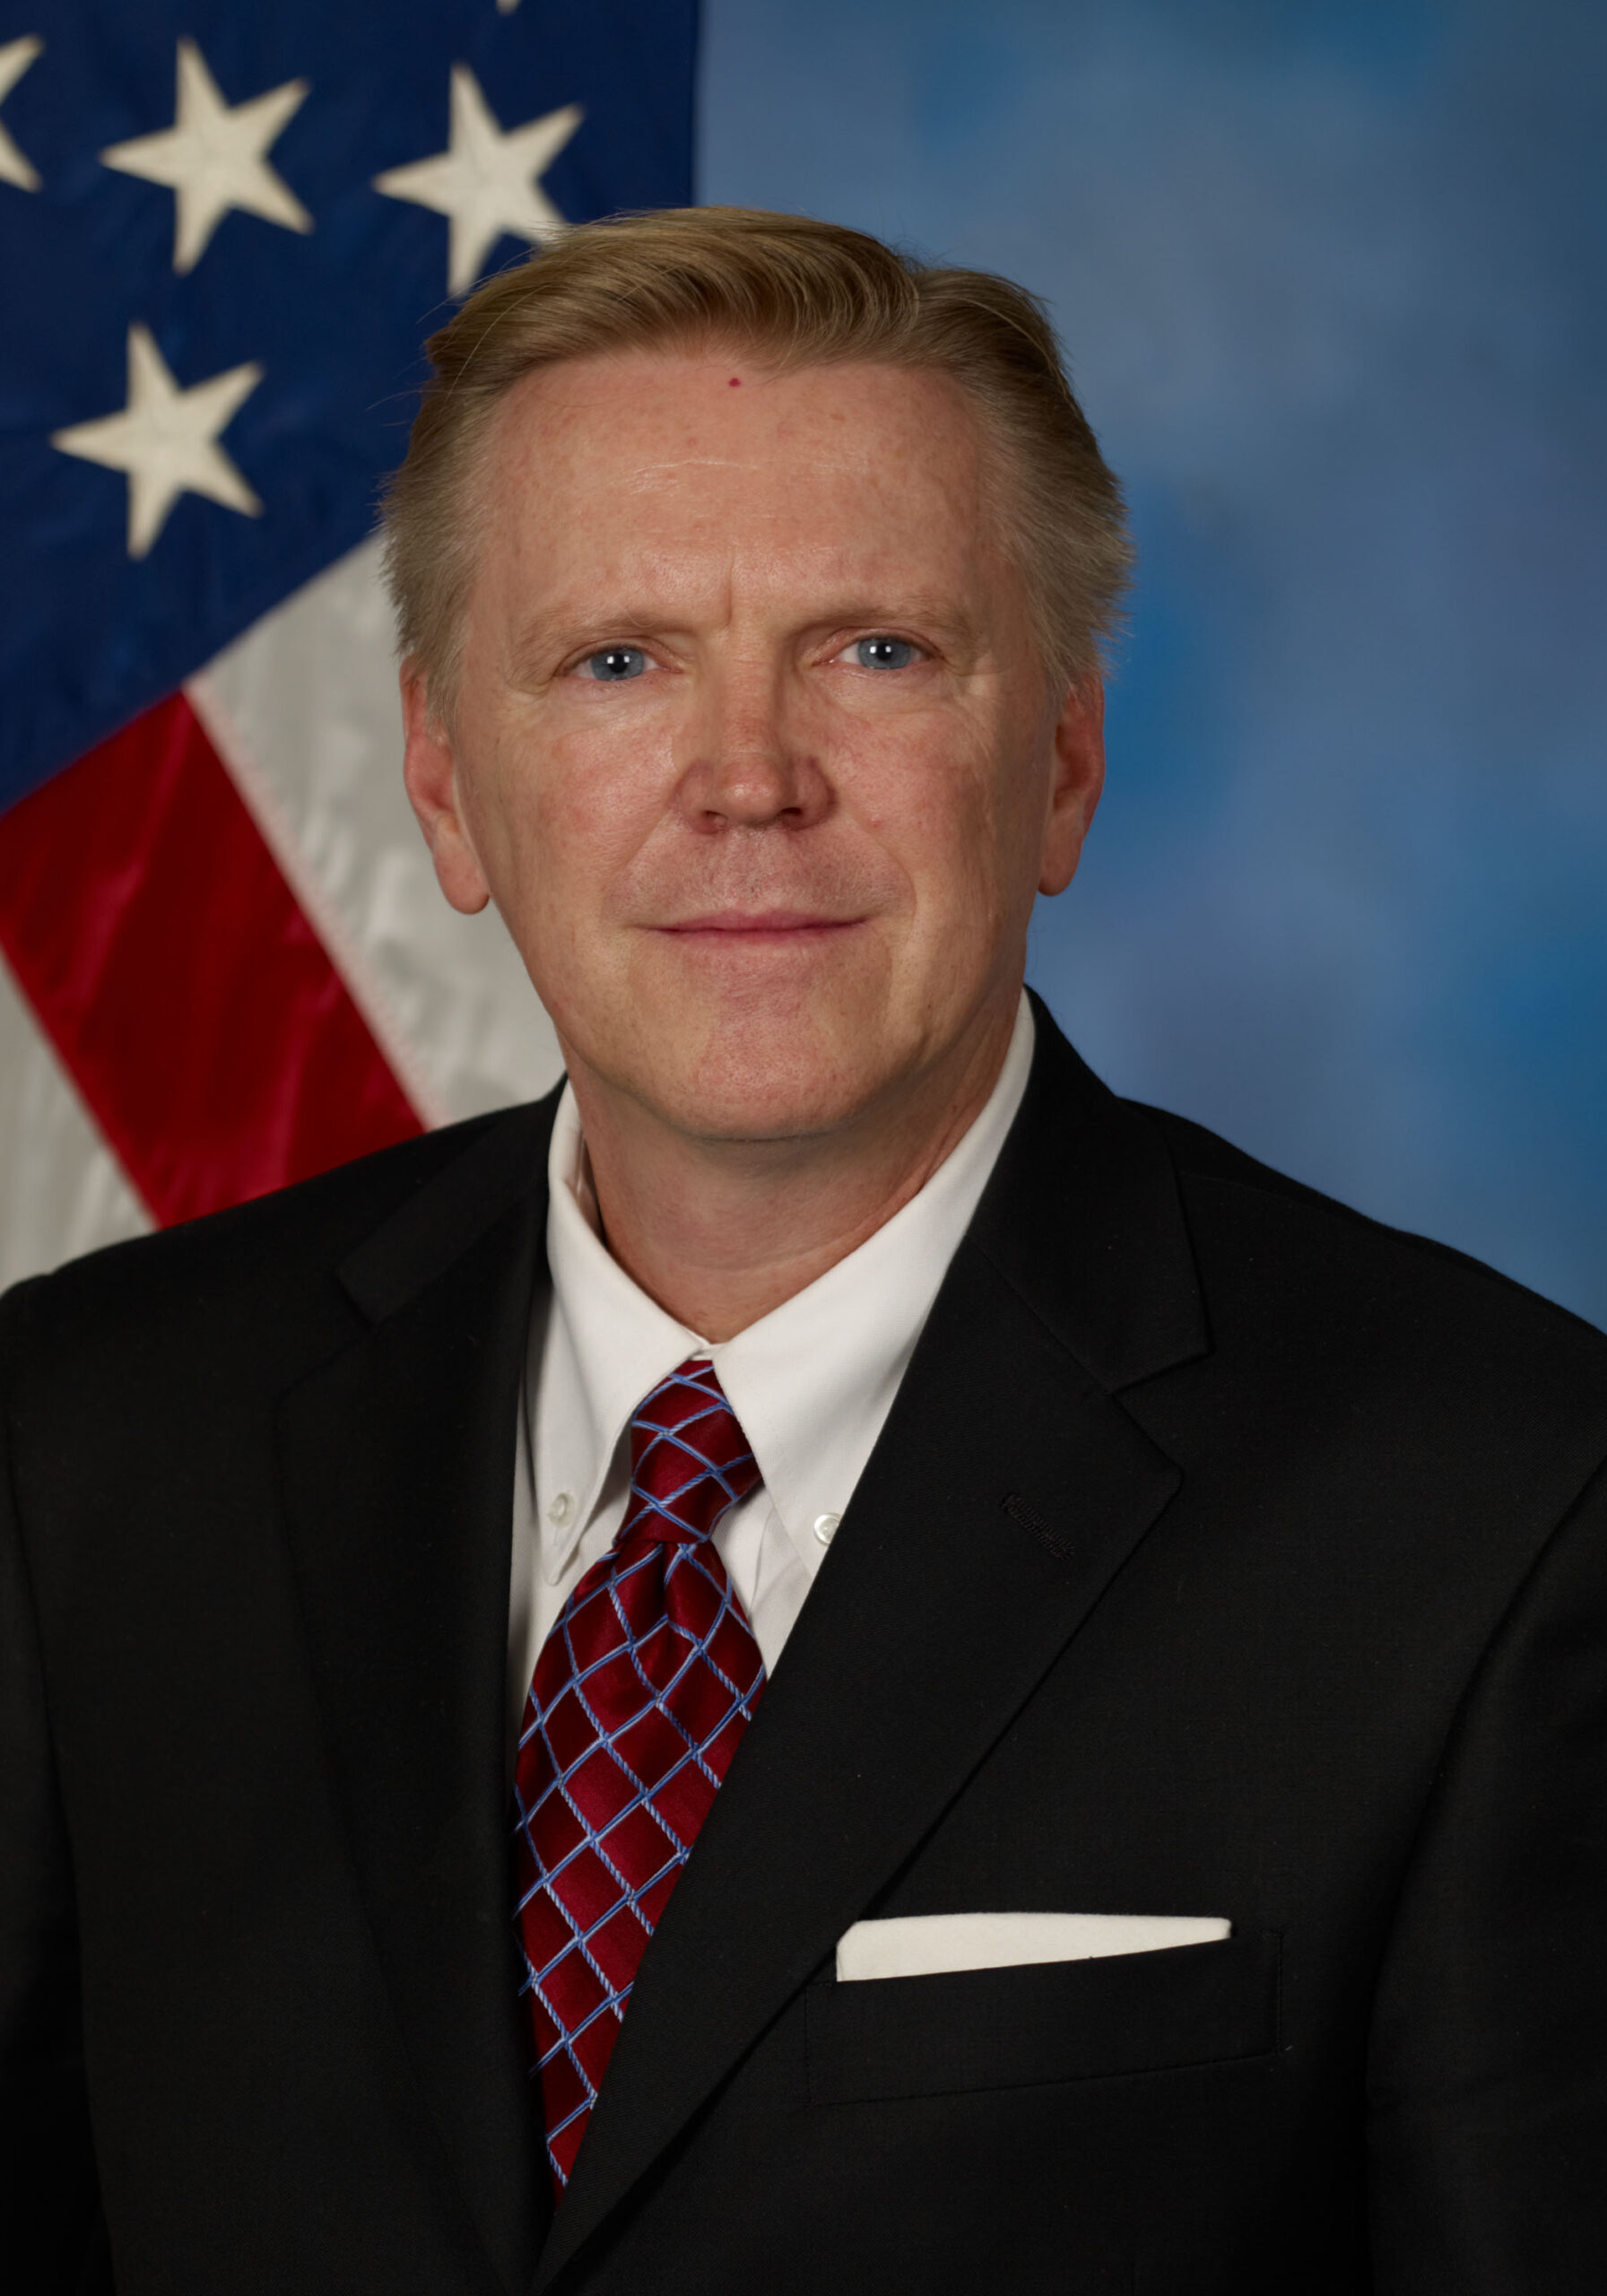 Headshot of a man in front of a U.S. Flag. He has short light brown hair. He is wearing a black suit with a white shirt underneath and a red tie.